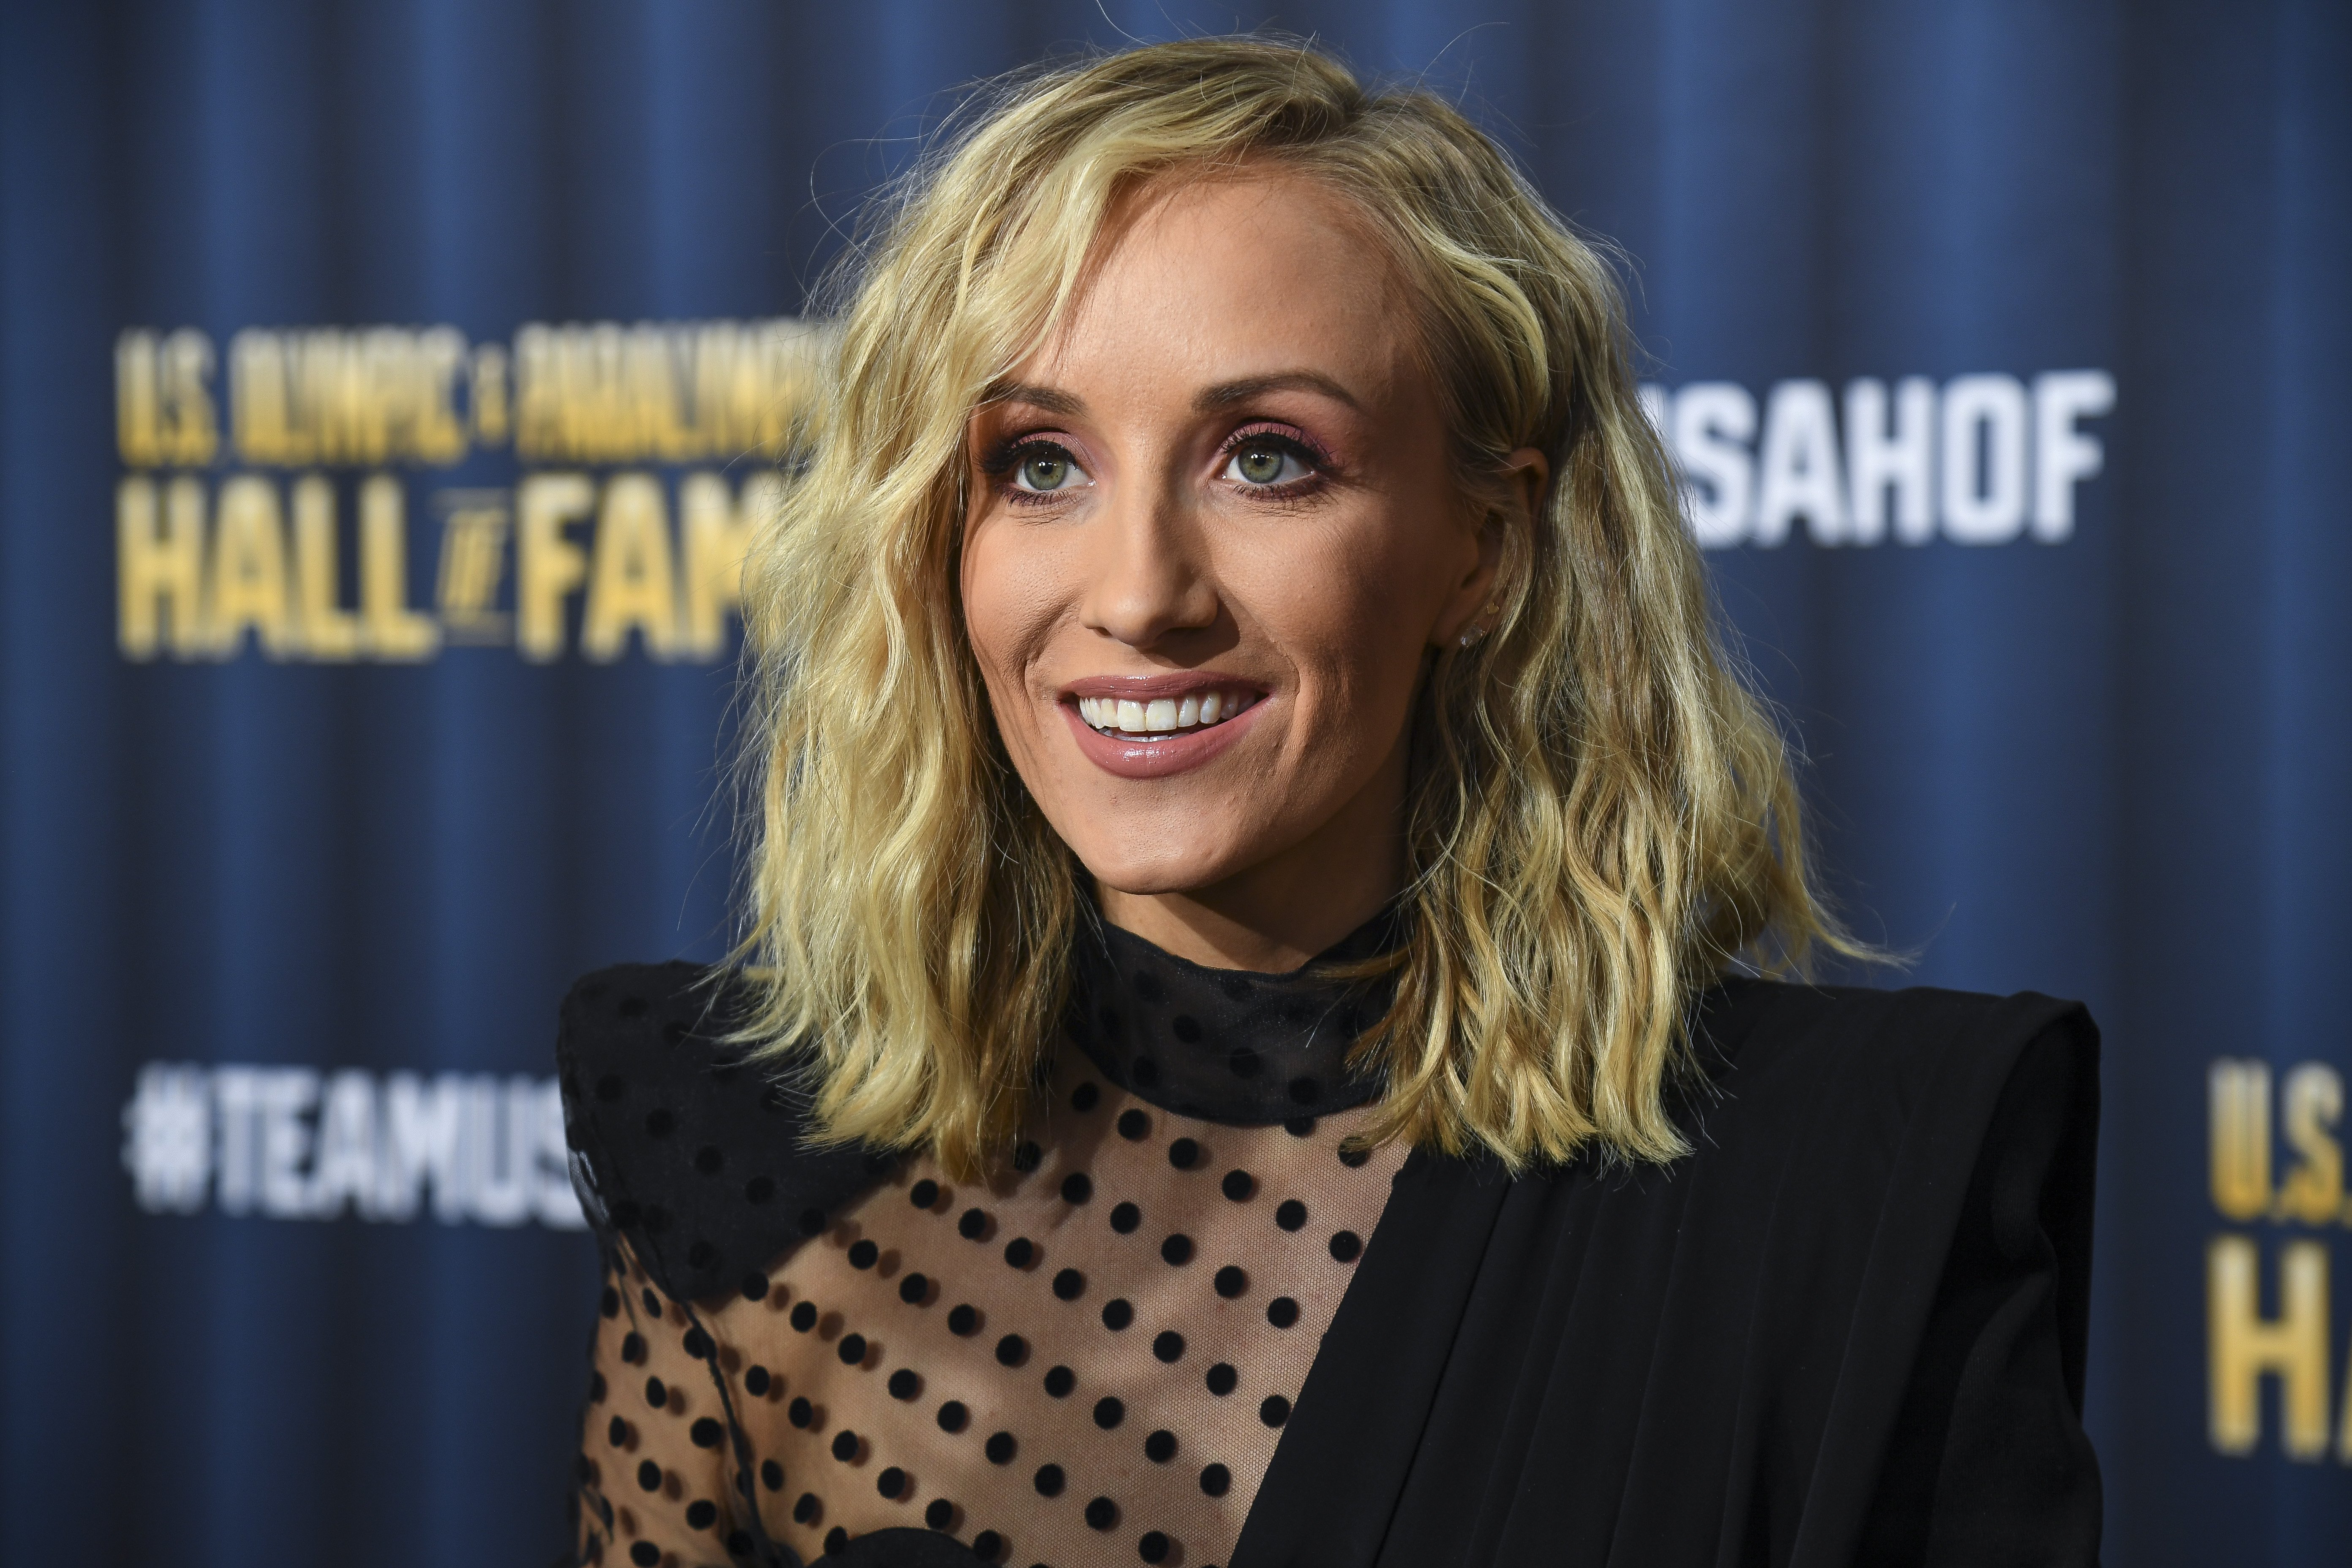 Nastia Liukin pictured at the U.S. Olympic Hall of Fame Class of 2019 Induction Ceremony. | Photo: Getty Images